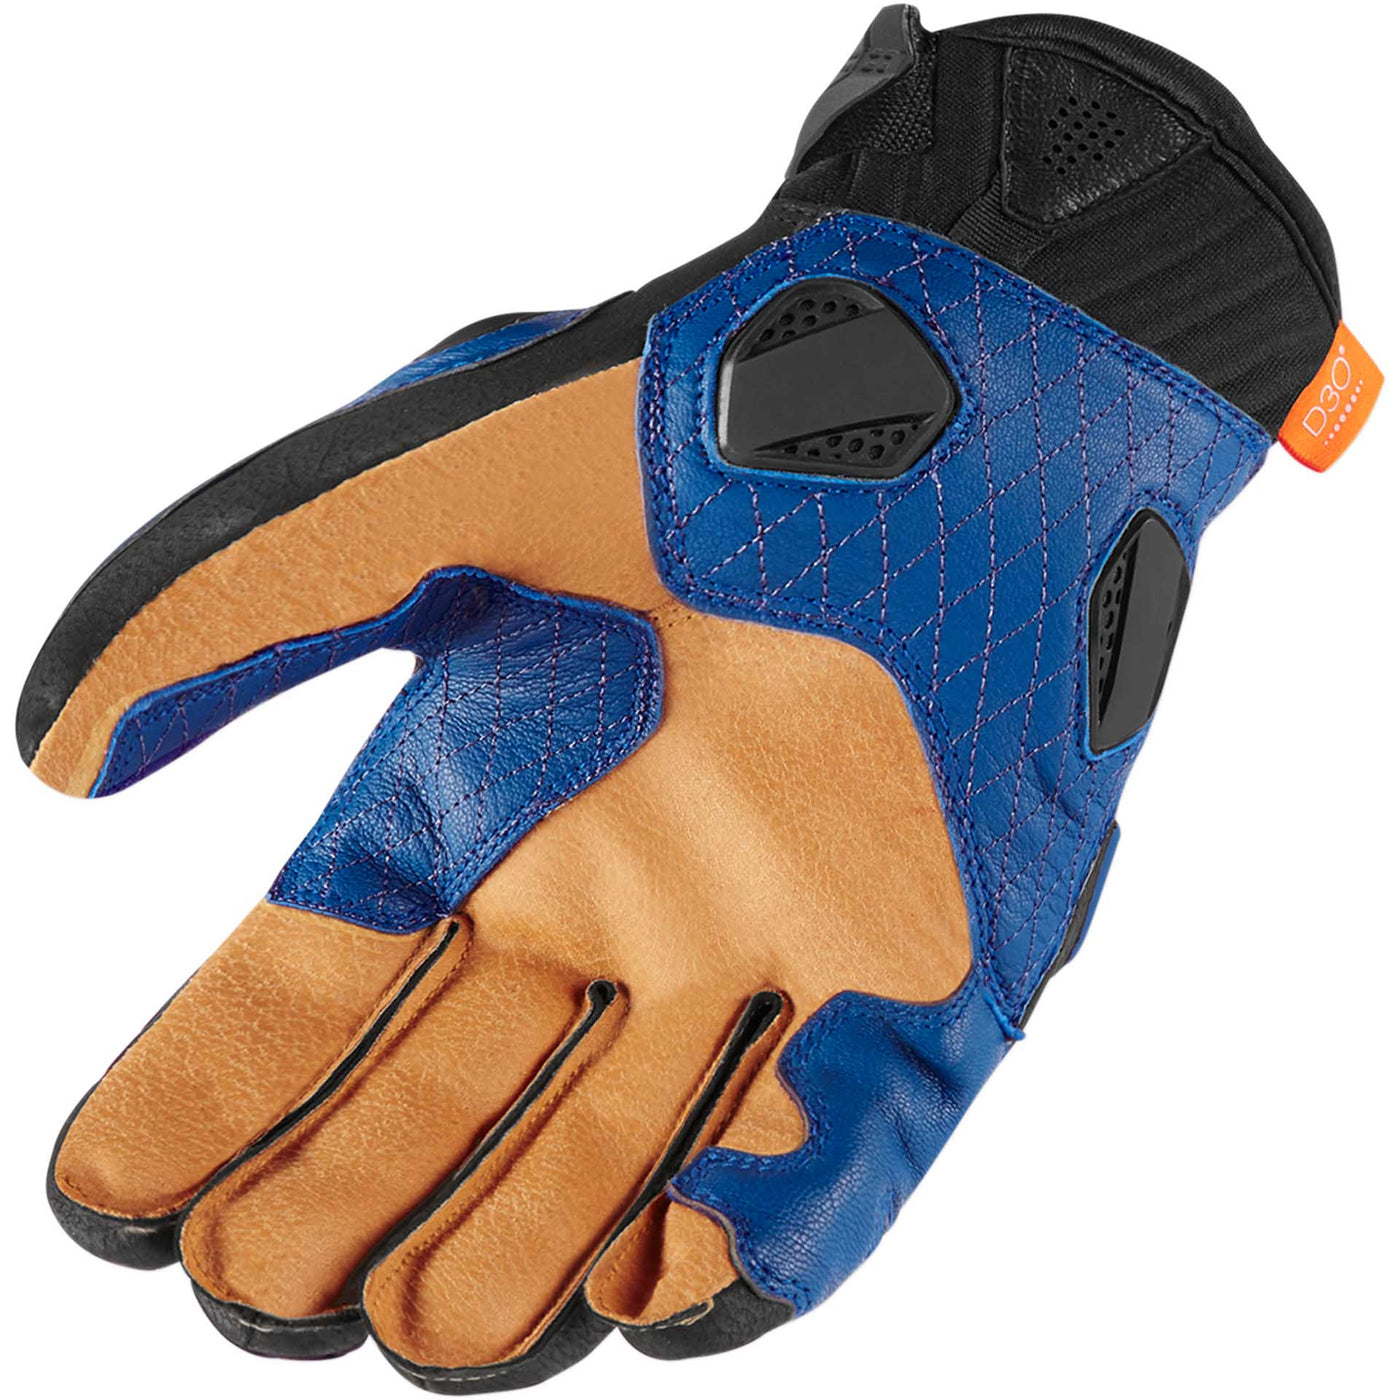 ICON Motorcycle Hypersport Short Gloves